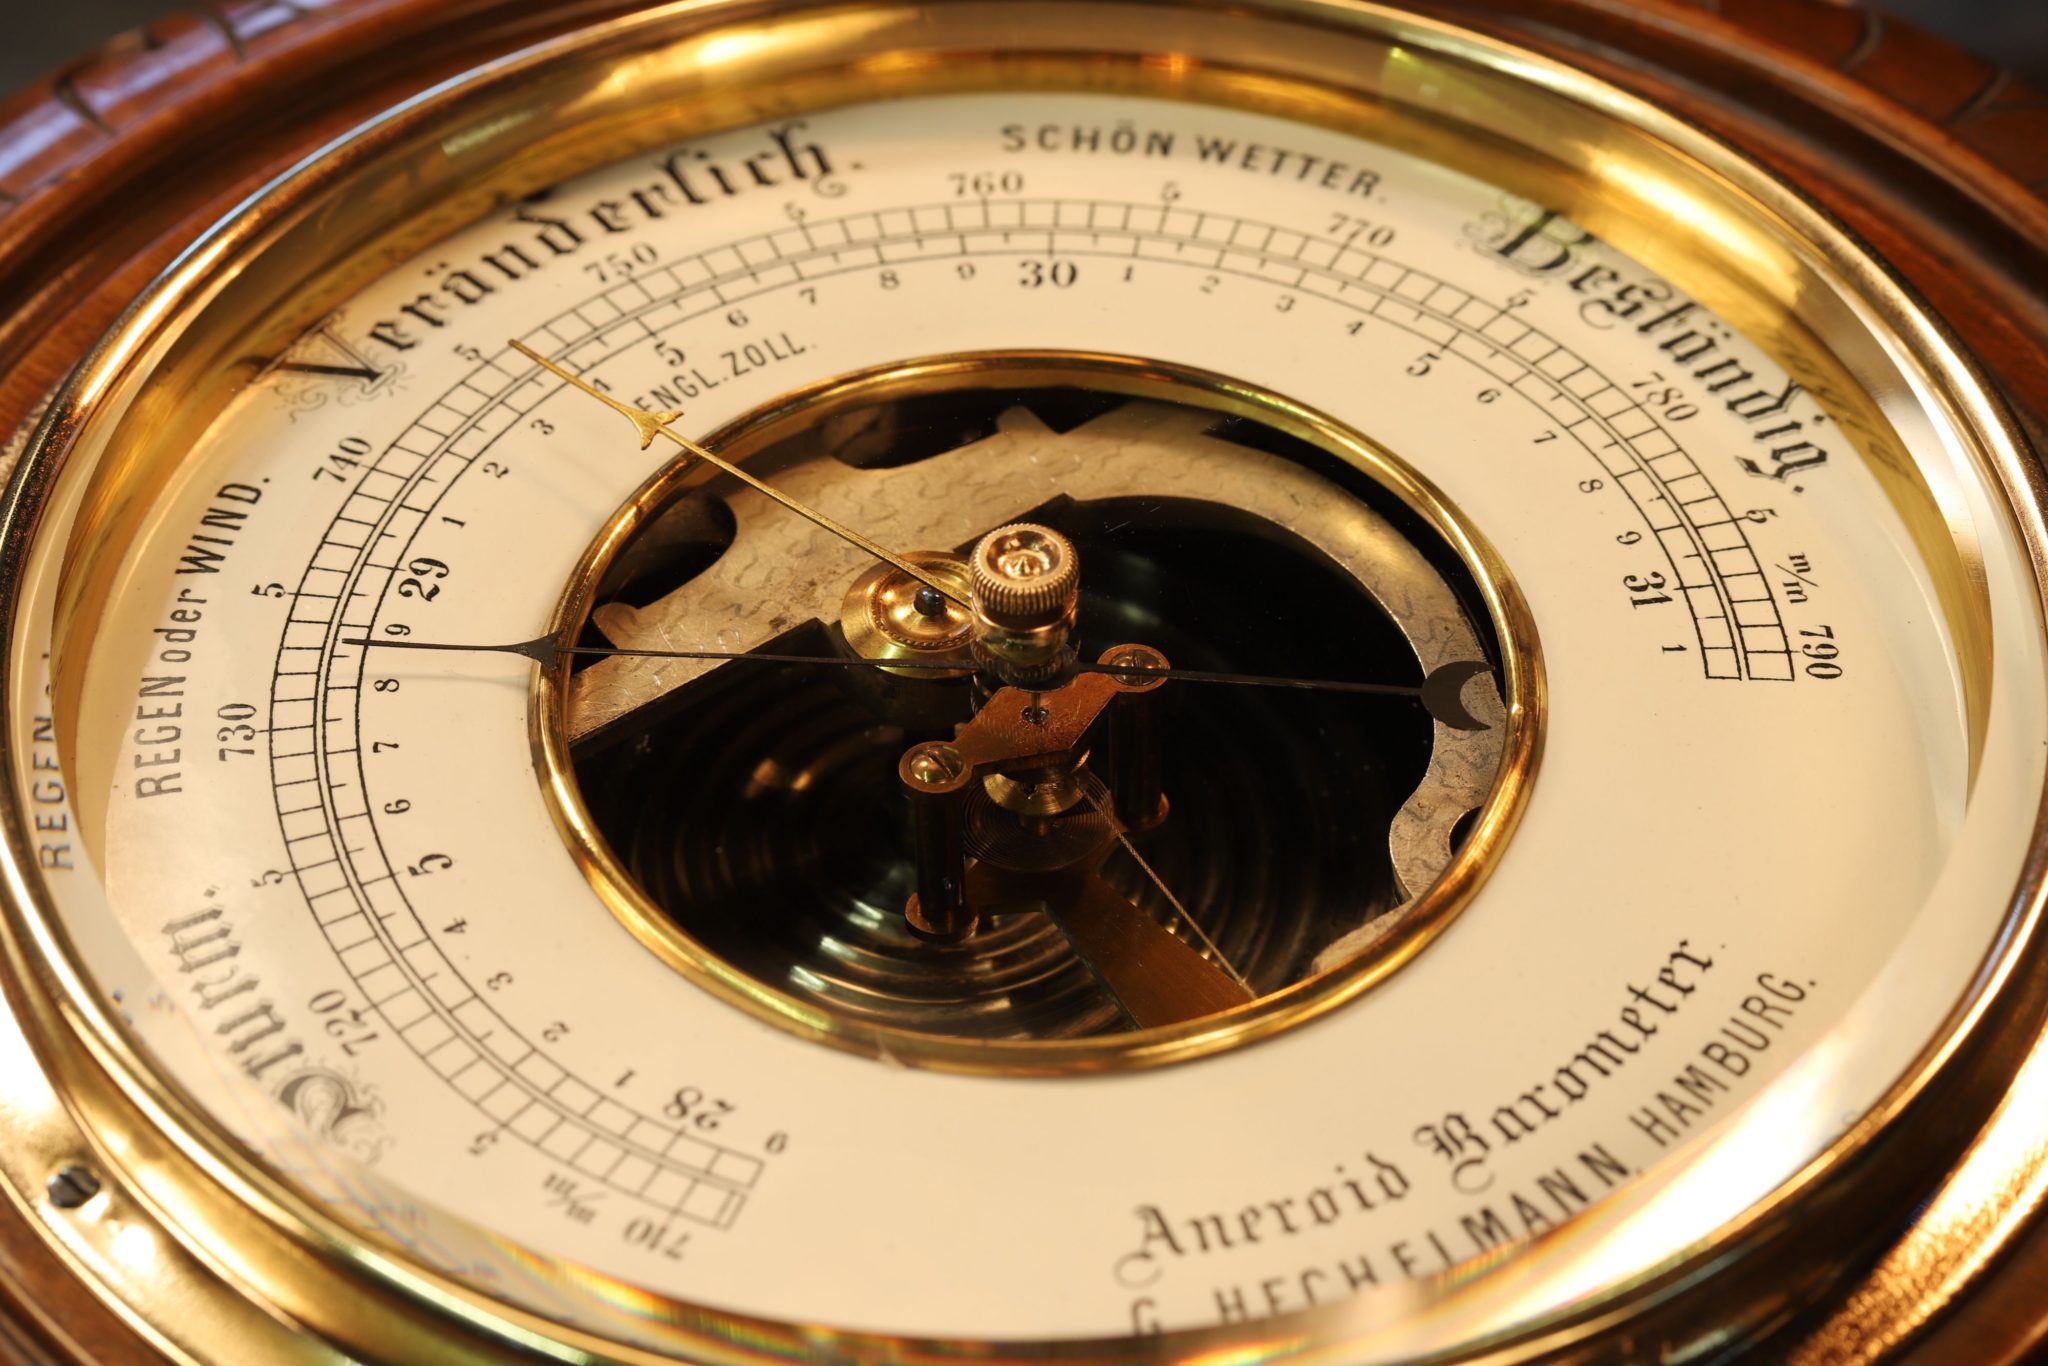 Image of Aneroid Barometer by Hechelmann c1895